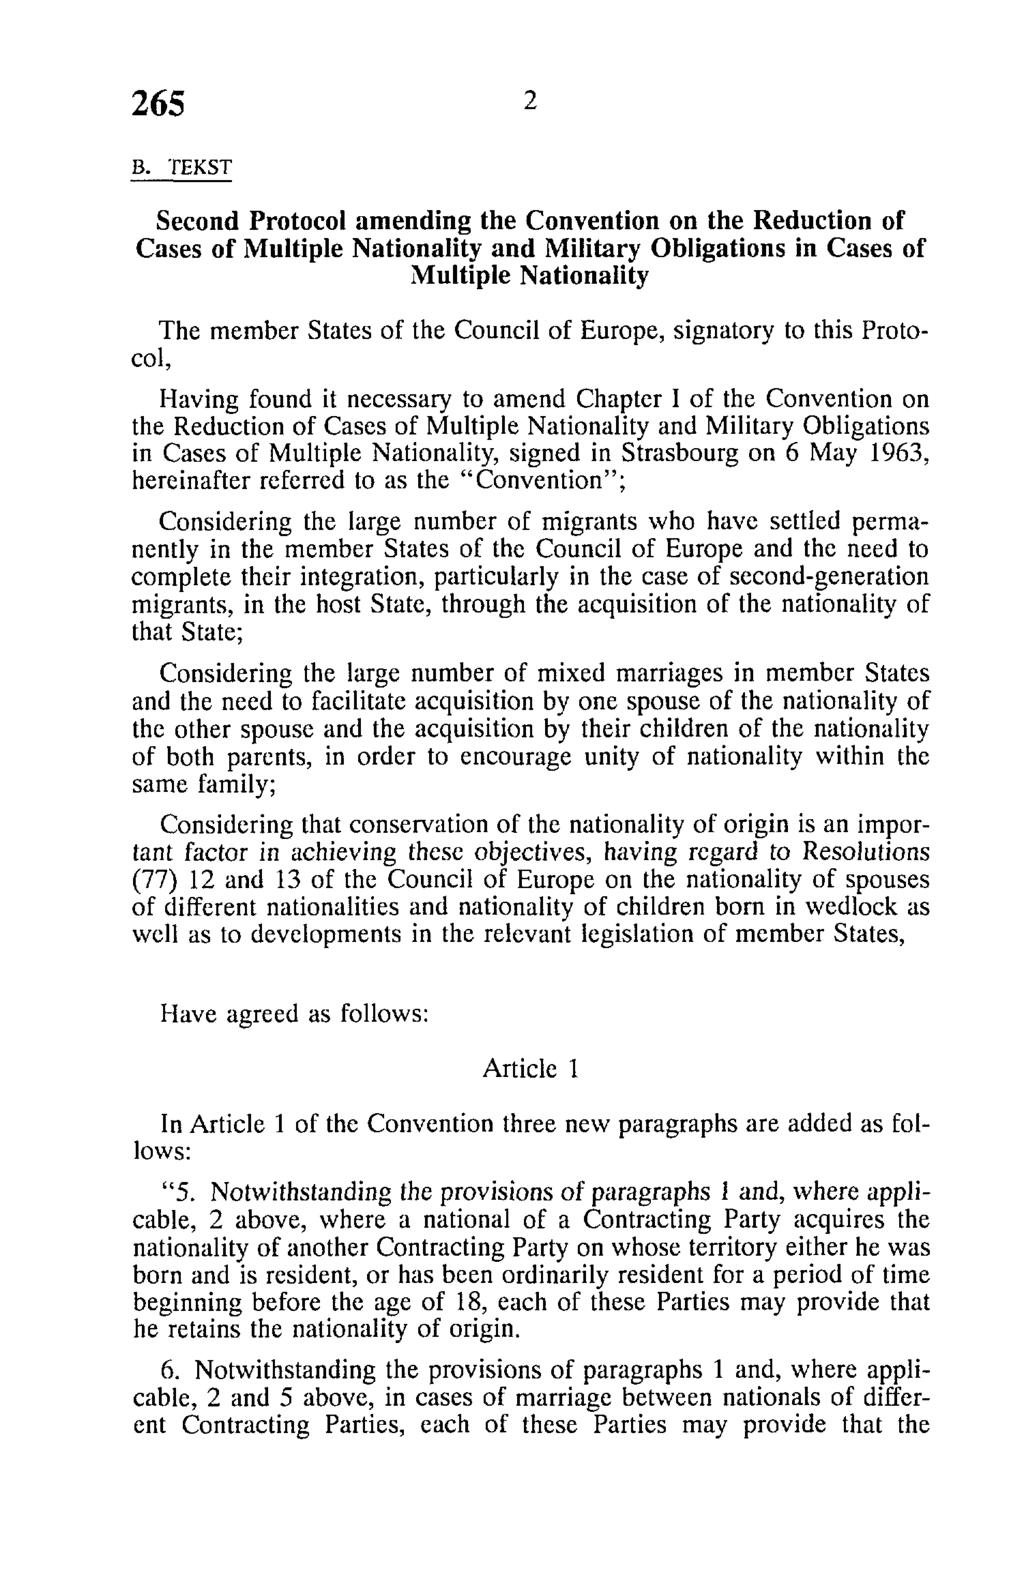 B. TEKST Second Protocol amending the Convention on the Reduction of Cases of Multiple Nationality and Military Obligations in Cases of Multiple Nationality The member States of the Council of